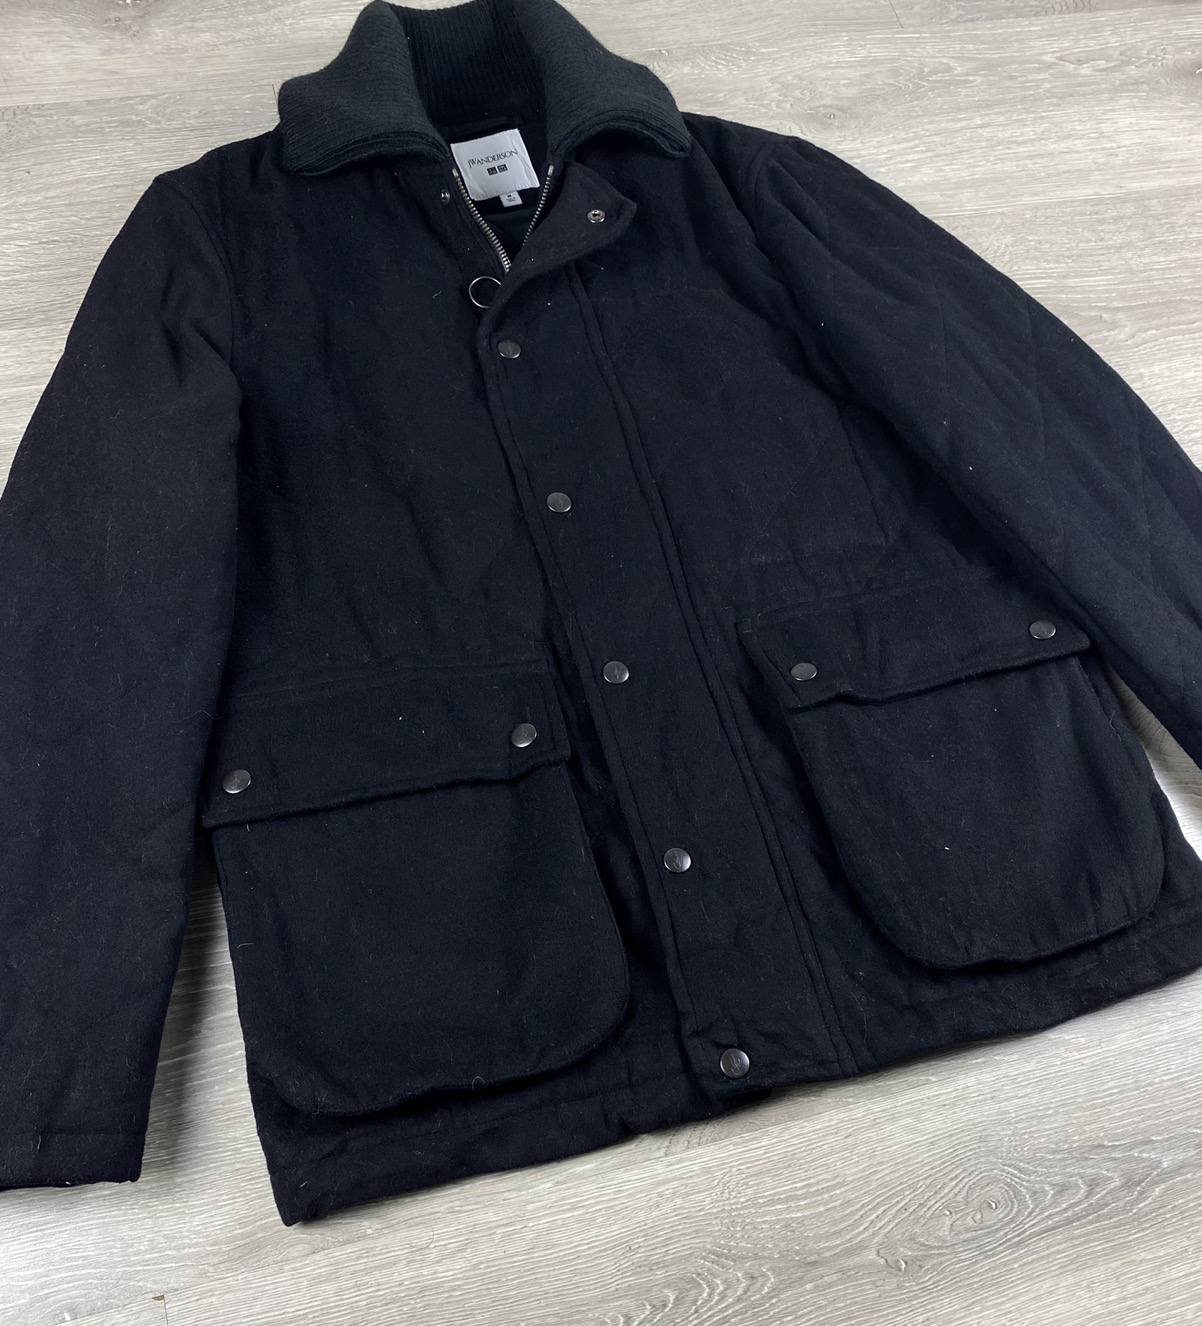 Uniqlo - J. W. Anderson X Uniqlo Quilted Double Pocket Wool Jacket - 2